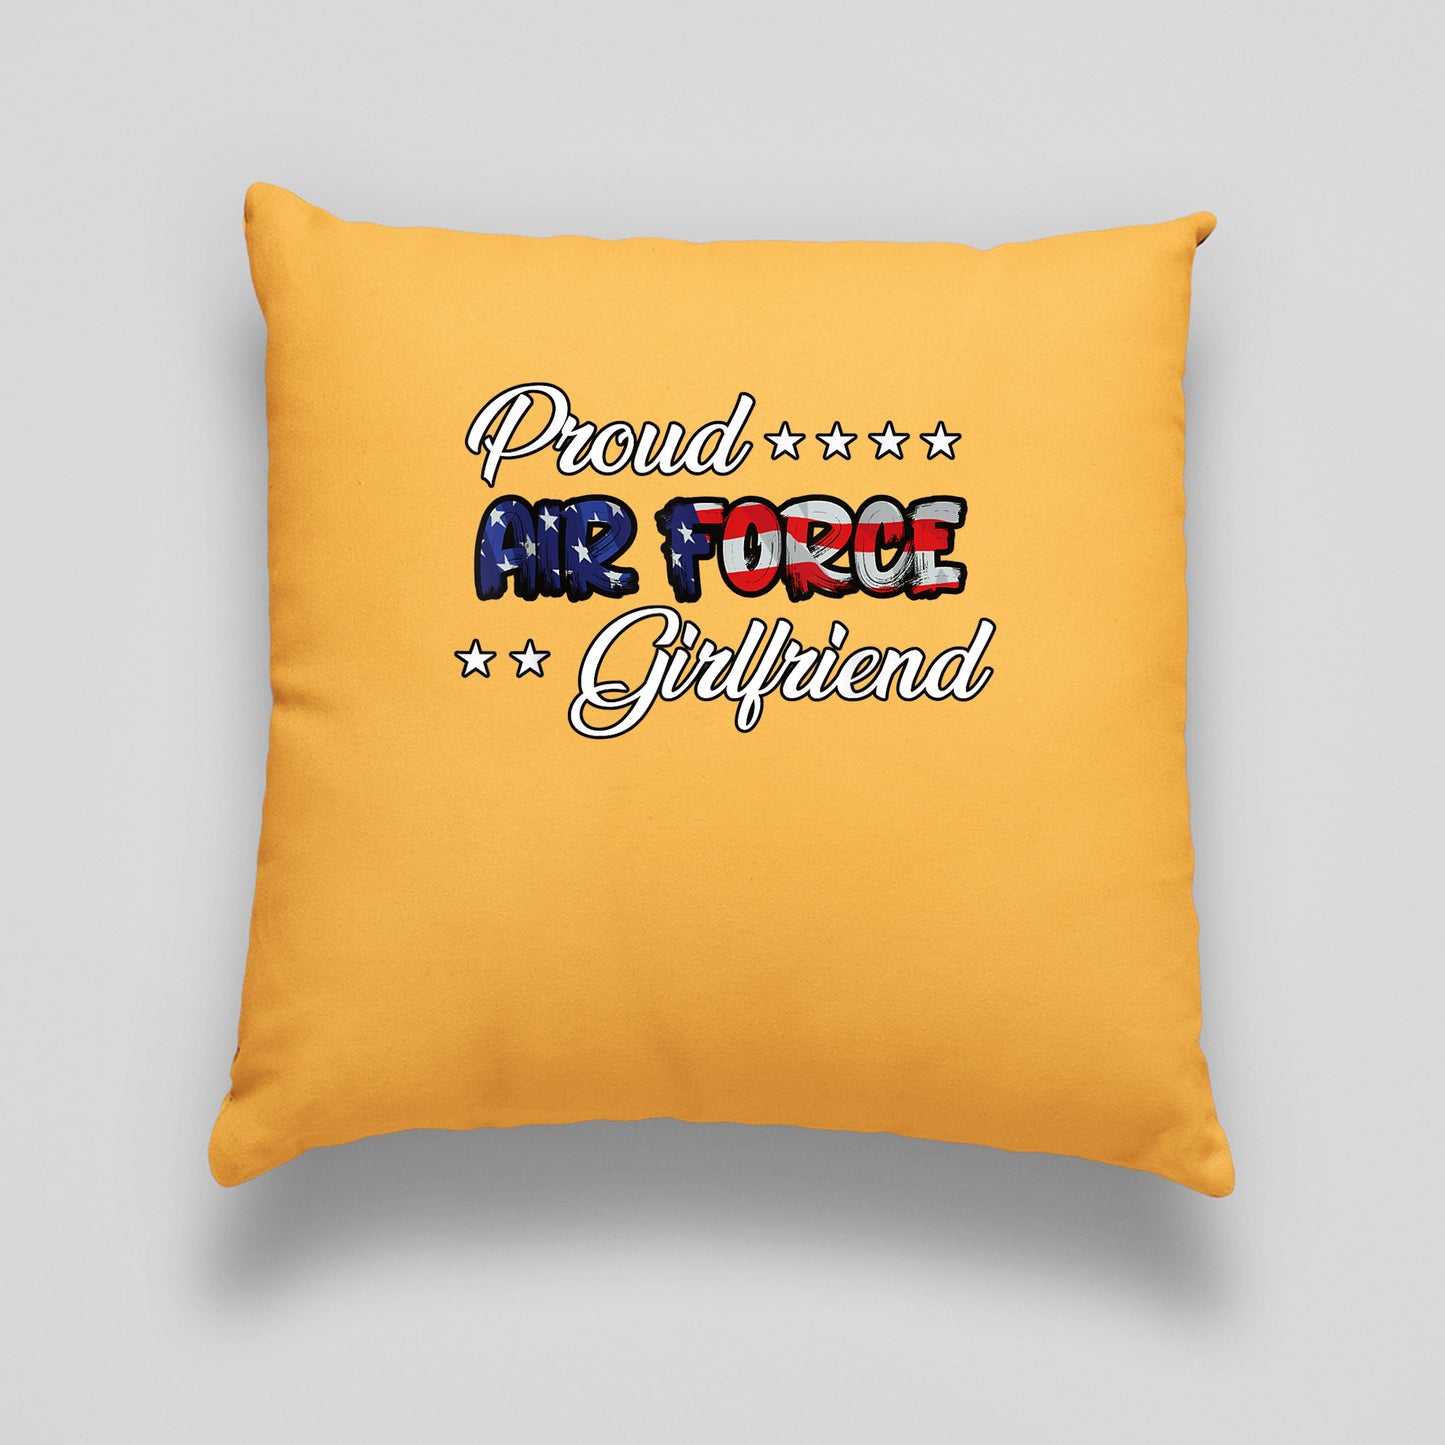 Memorial Day 2021, Air Force Memorial Pillow, US FLag Air Force Girlfrined Print Linen Cushion, For Mom From Son